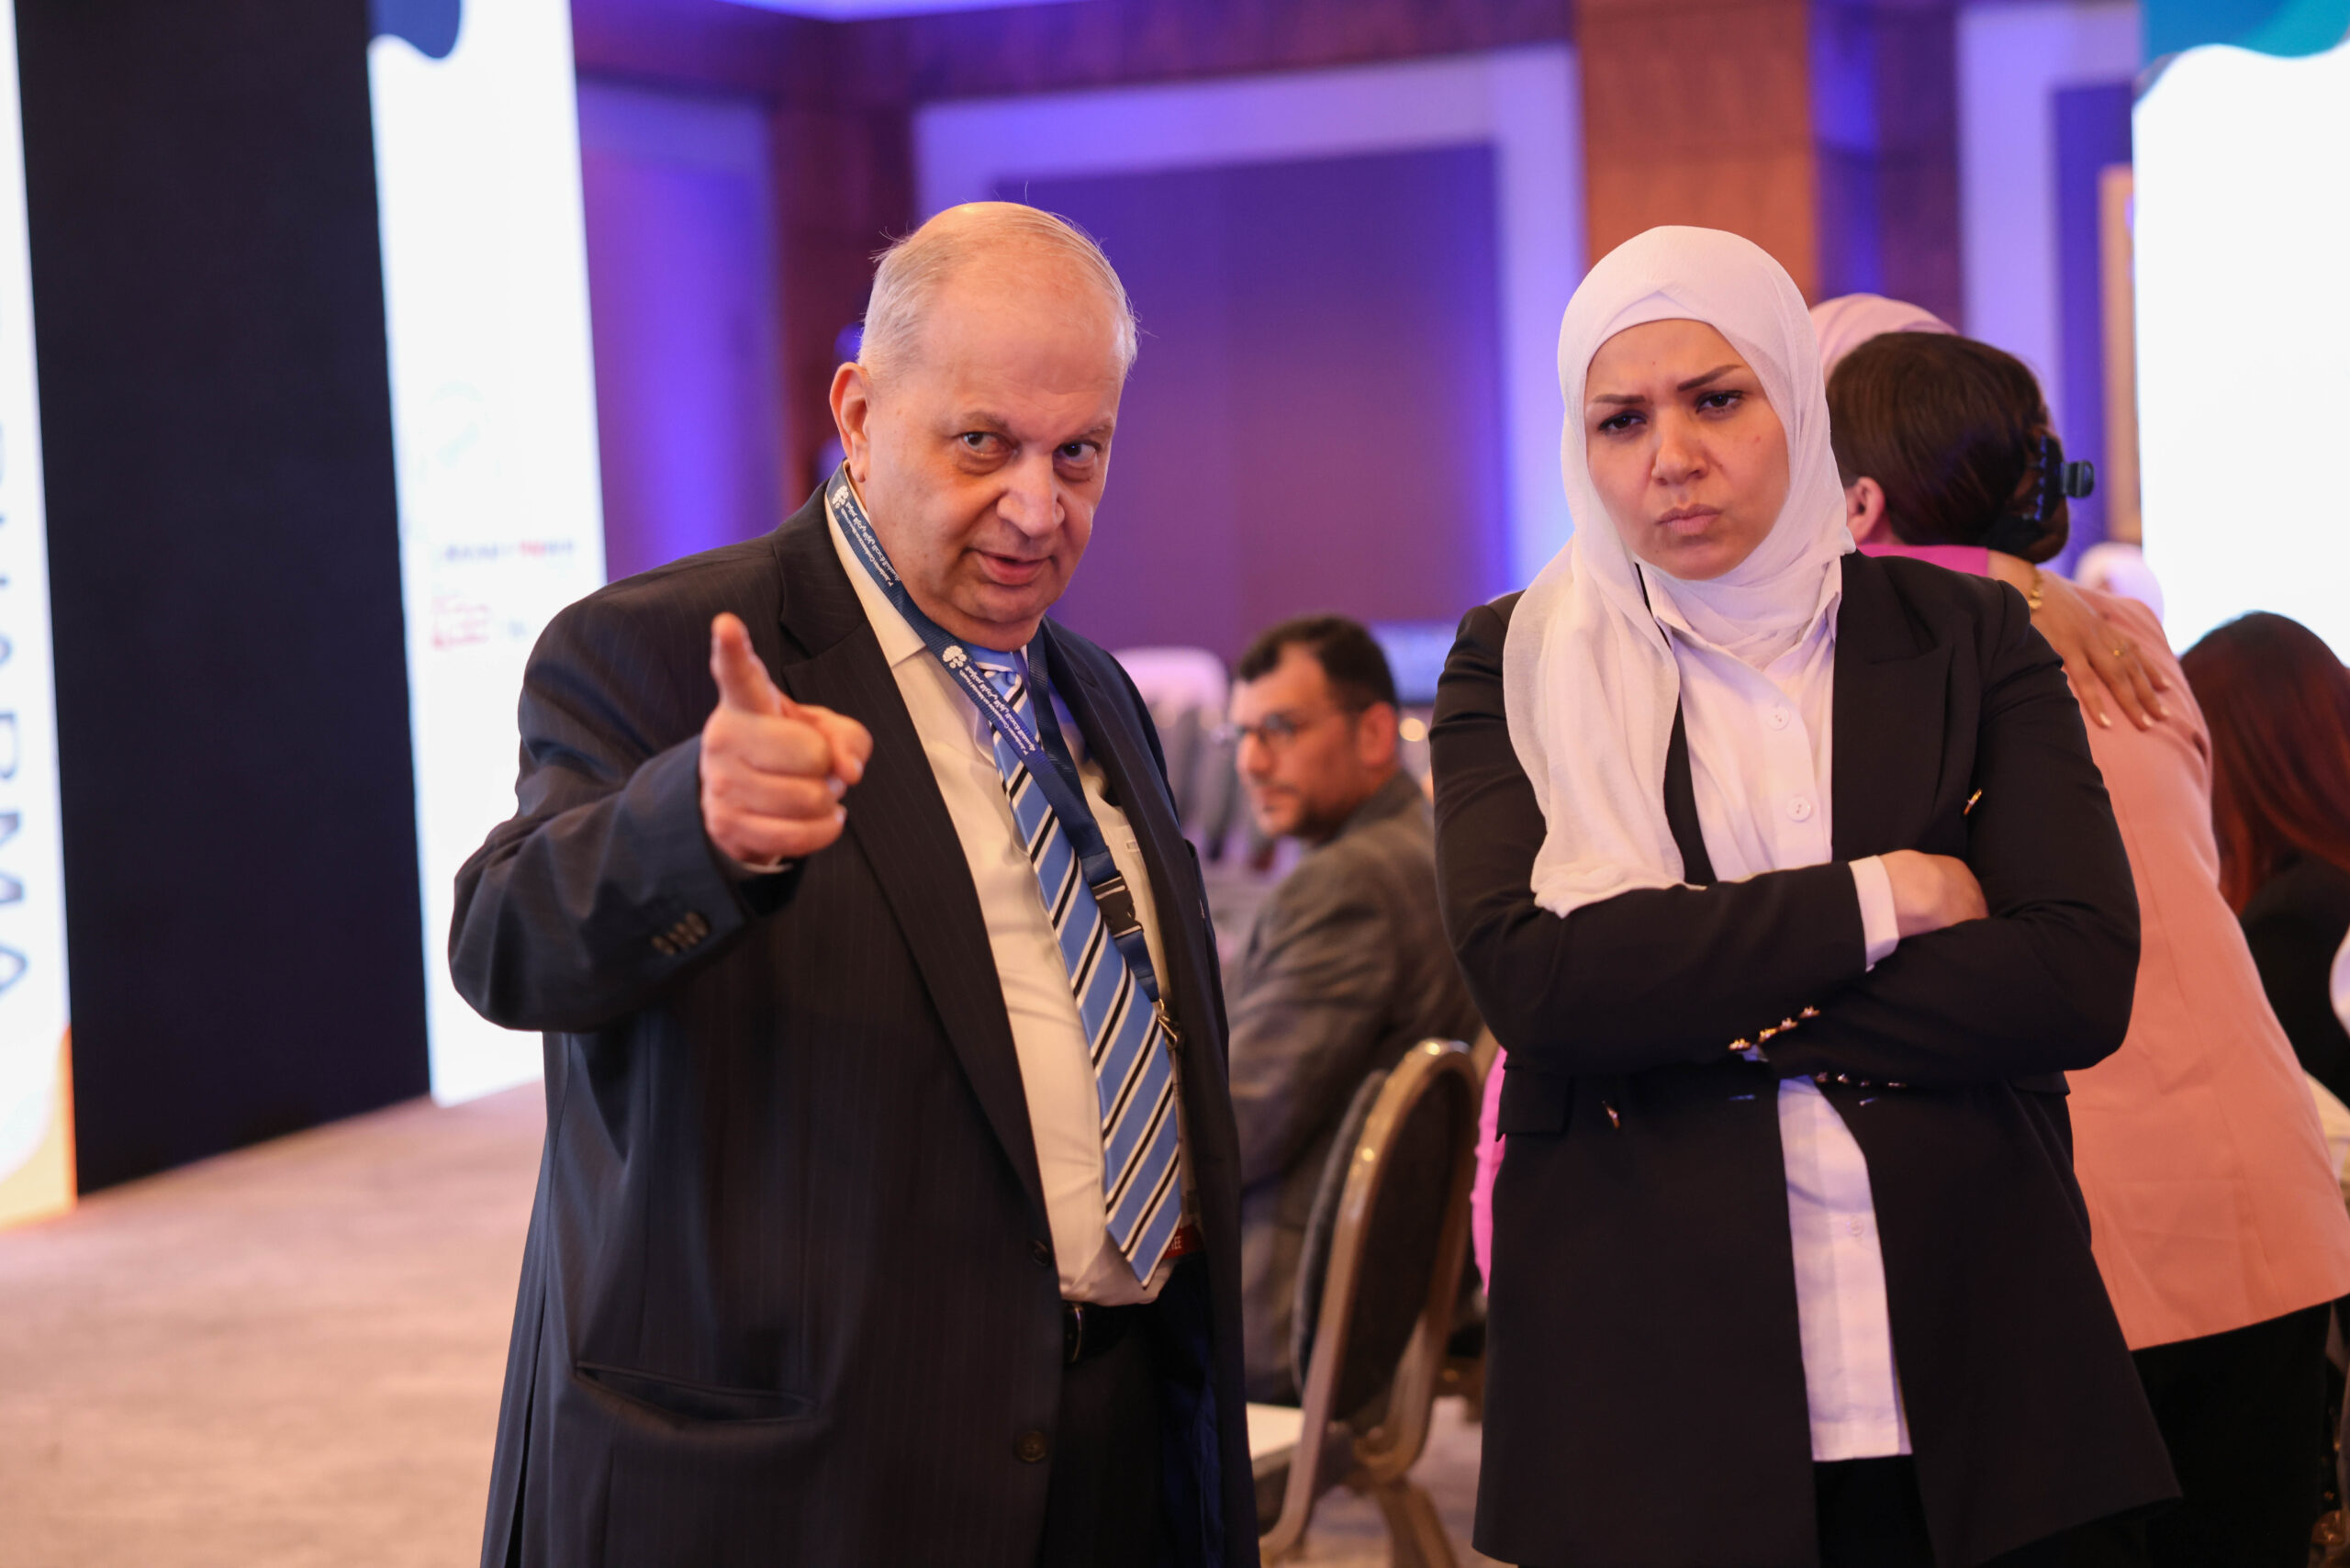 The First Jordanian Conference on Mental Health